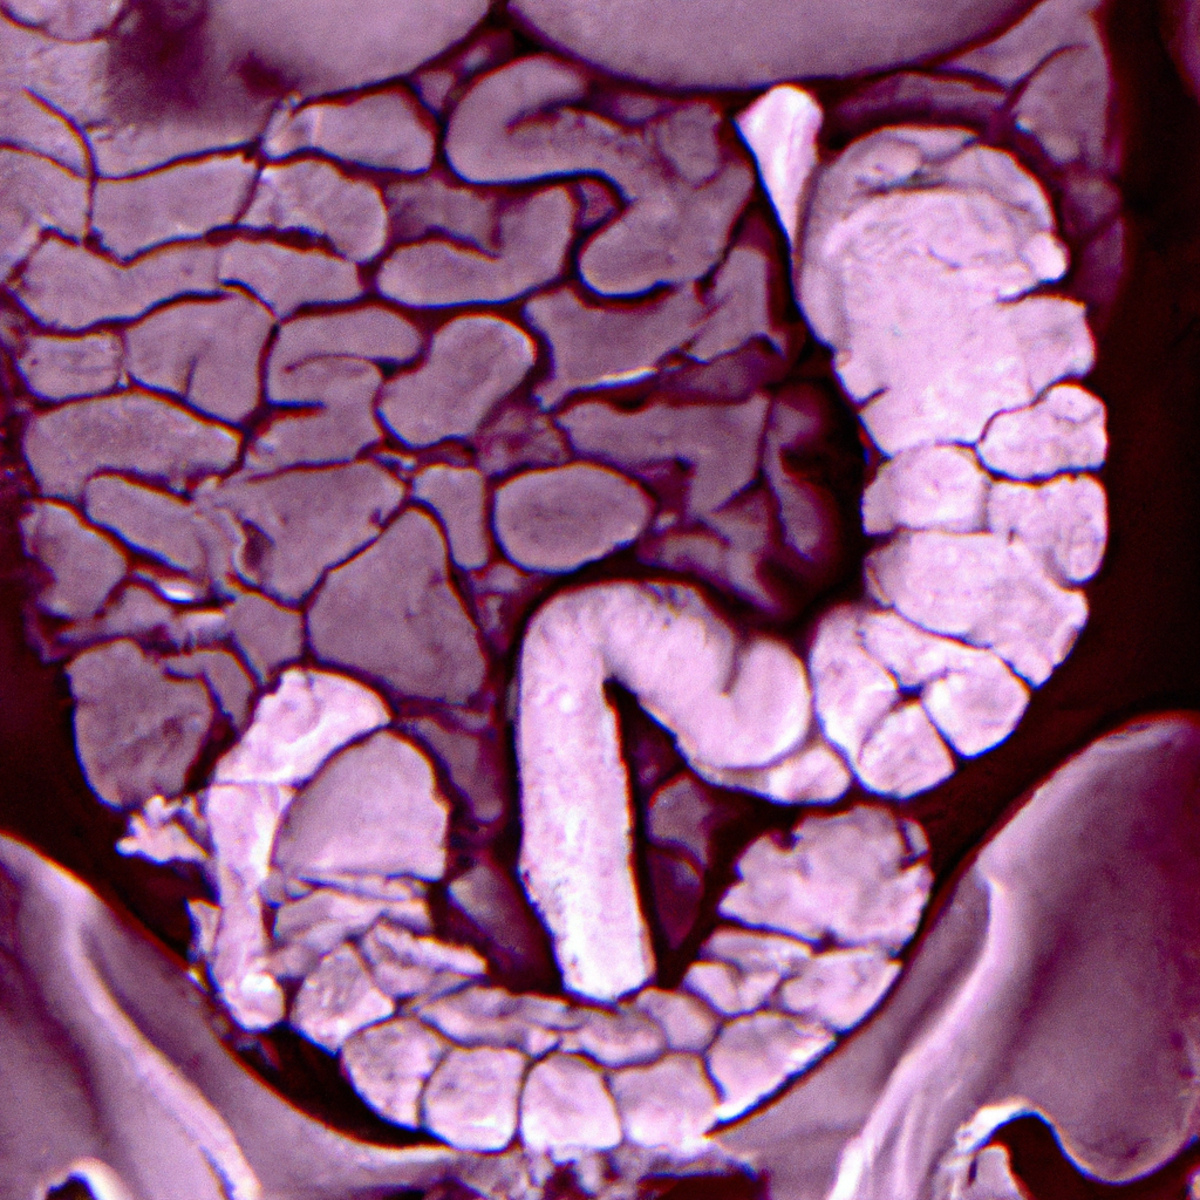 Close-up of inflamed stomach wall in eosinophilic gastroenteritis, revealing reddened and swollen tissues - Eosinophilic gastroenteritis